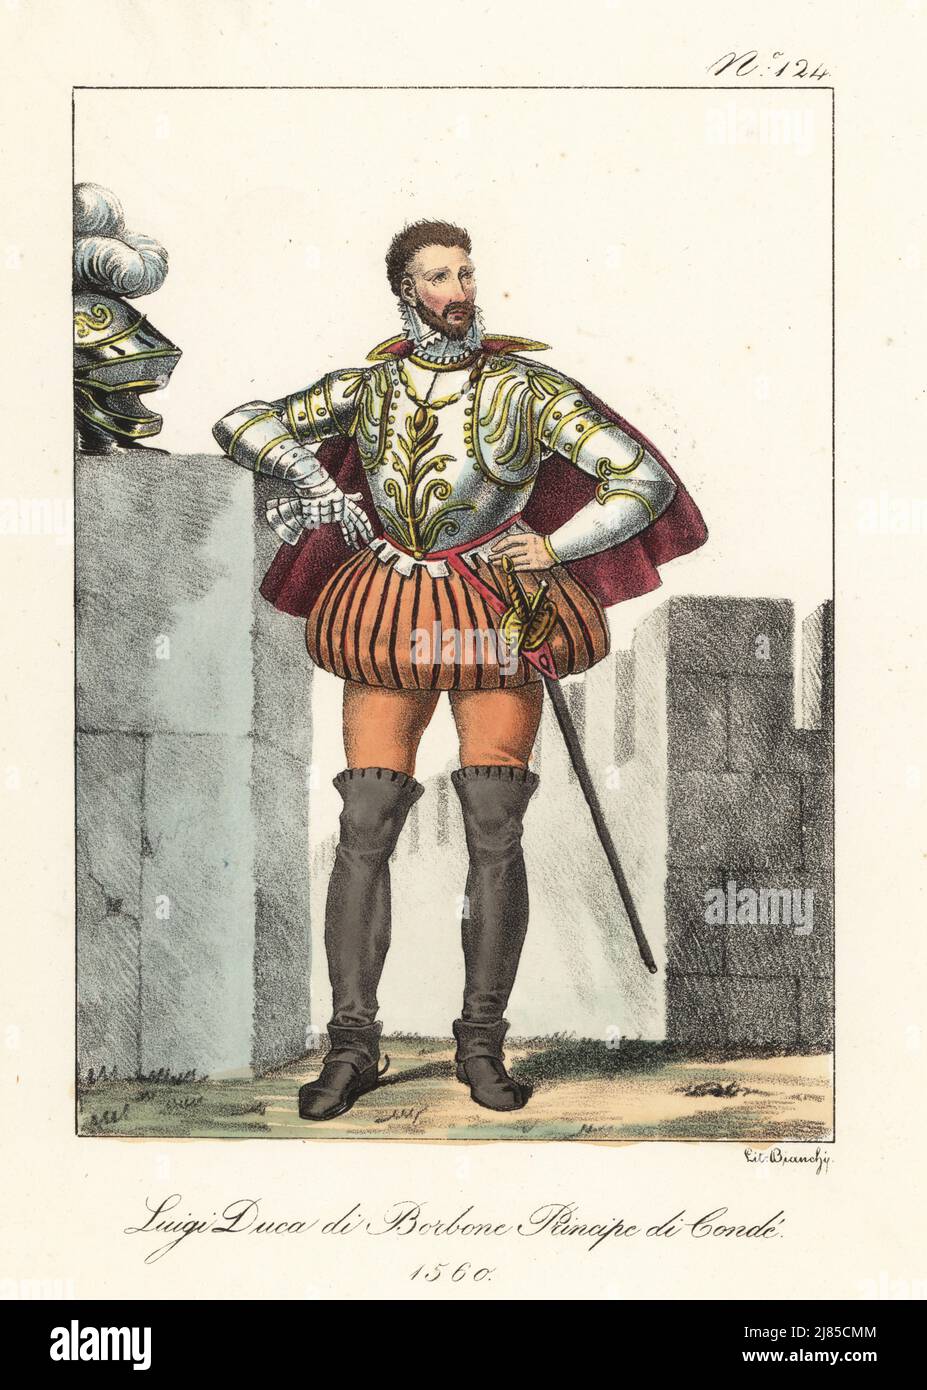 Louis de Bourbon, Prince of Condé, 1530-1569. Huguenot leader and general, founder of the Condé branch of the House of Bourbon. In ruff collar, cape, ornately decorated cuirass armour, slashed breeches, hose, boots, with sword, helm and gauntlets. Louis Duc de Bourbon, Prince de Conde. Handcoloured lithograph by Lorenzo Bianchi after Hippolyte Lecomte from Costumi civili e militari della monarchia francese dal 1200 al 1820, Naples, 1825. Italian edition of Lecomte’s Civilian and military costumes of the French monarchy from 1200 to 1820. Stock Photo